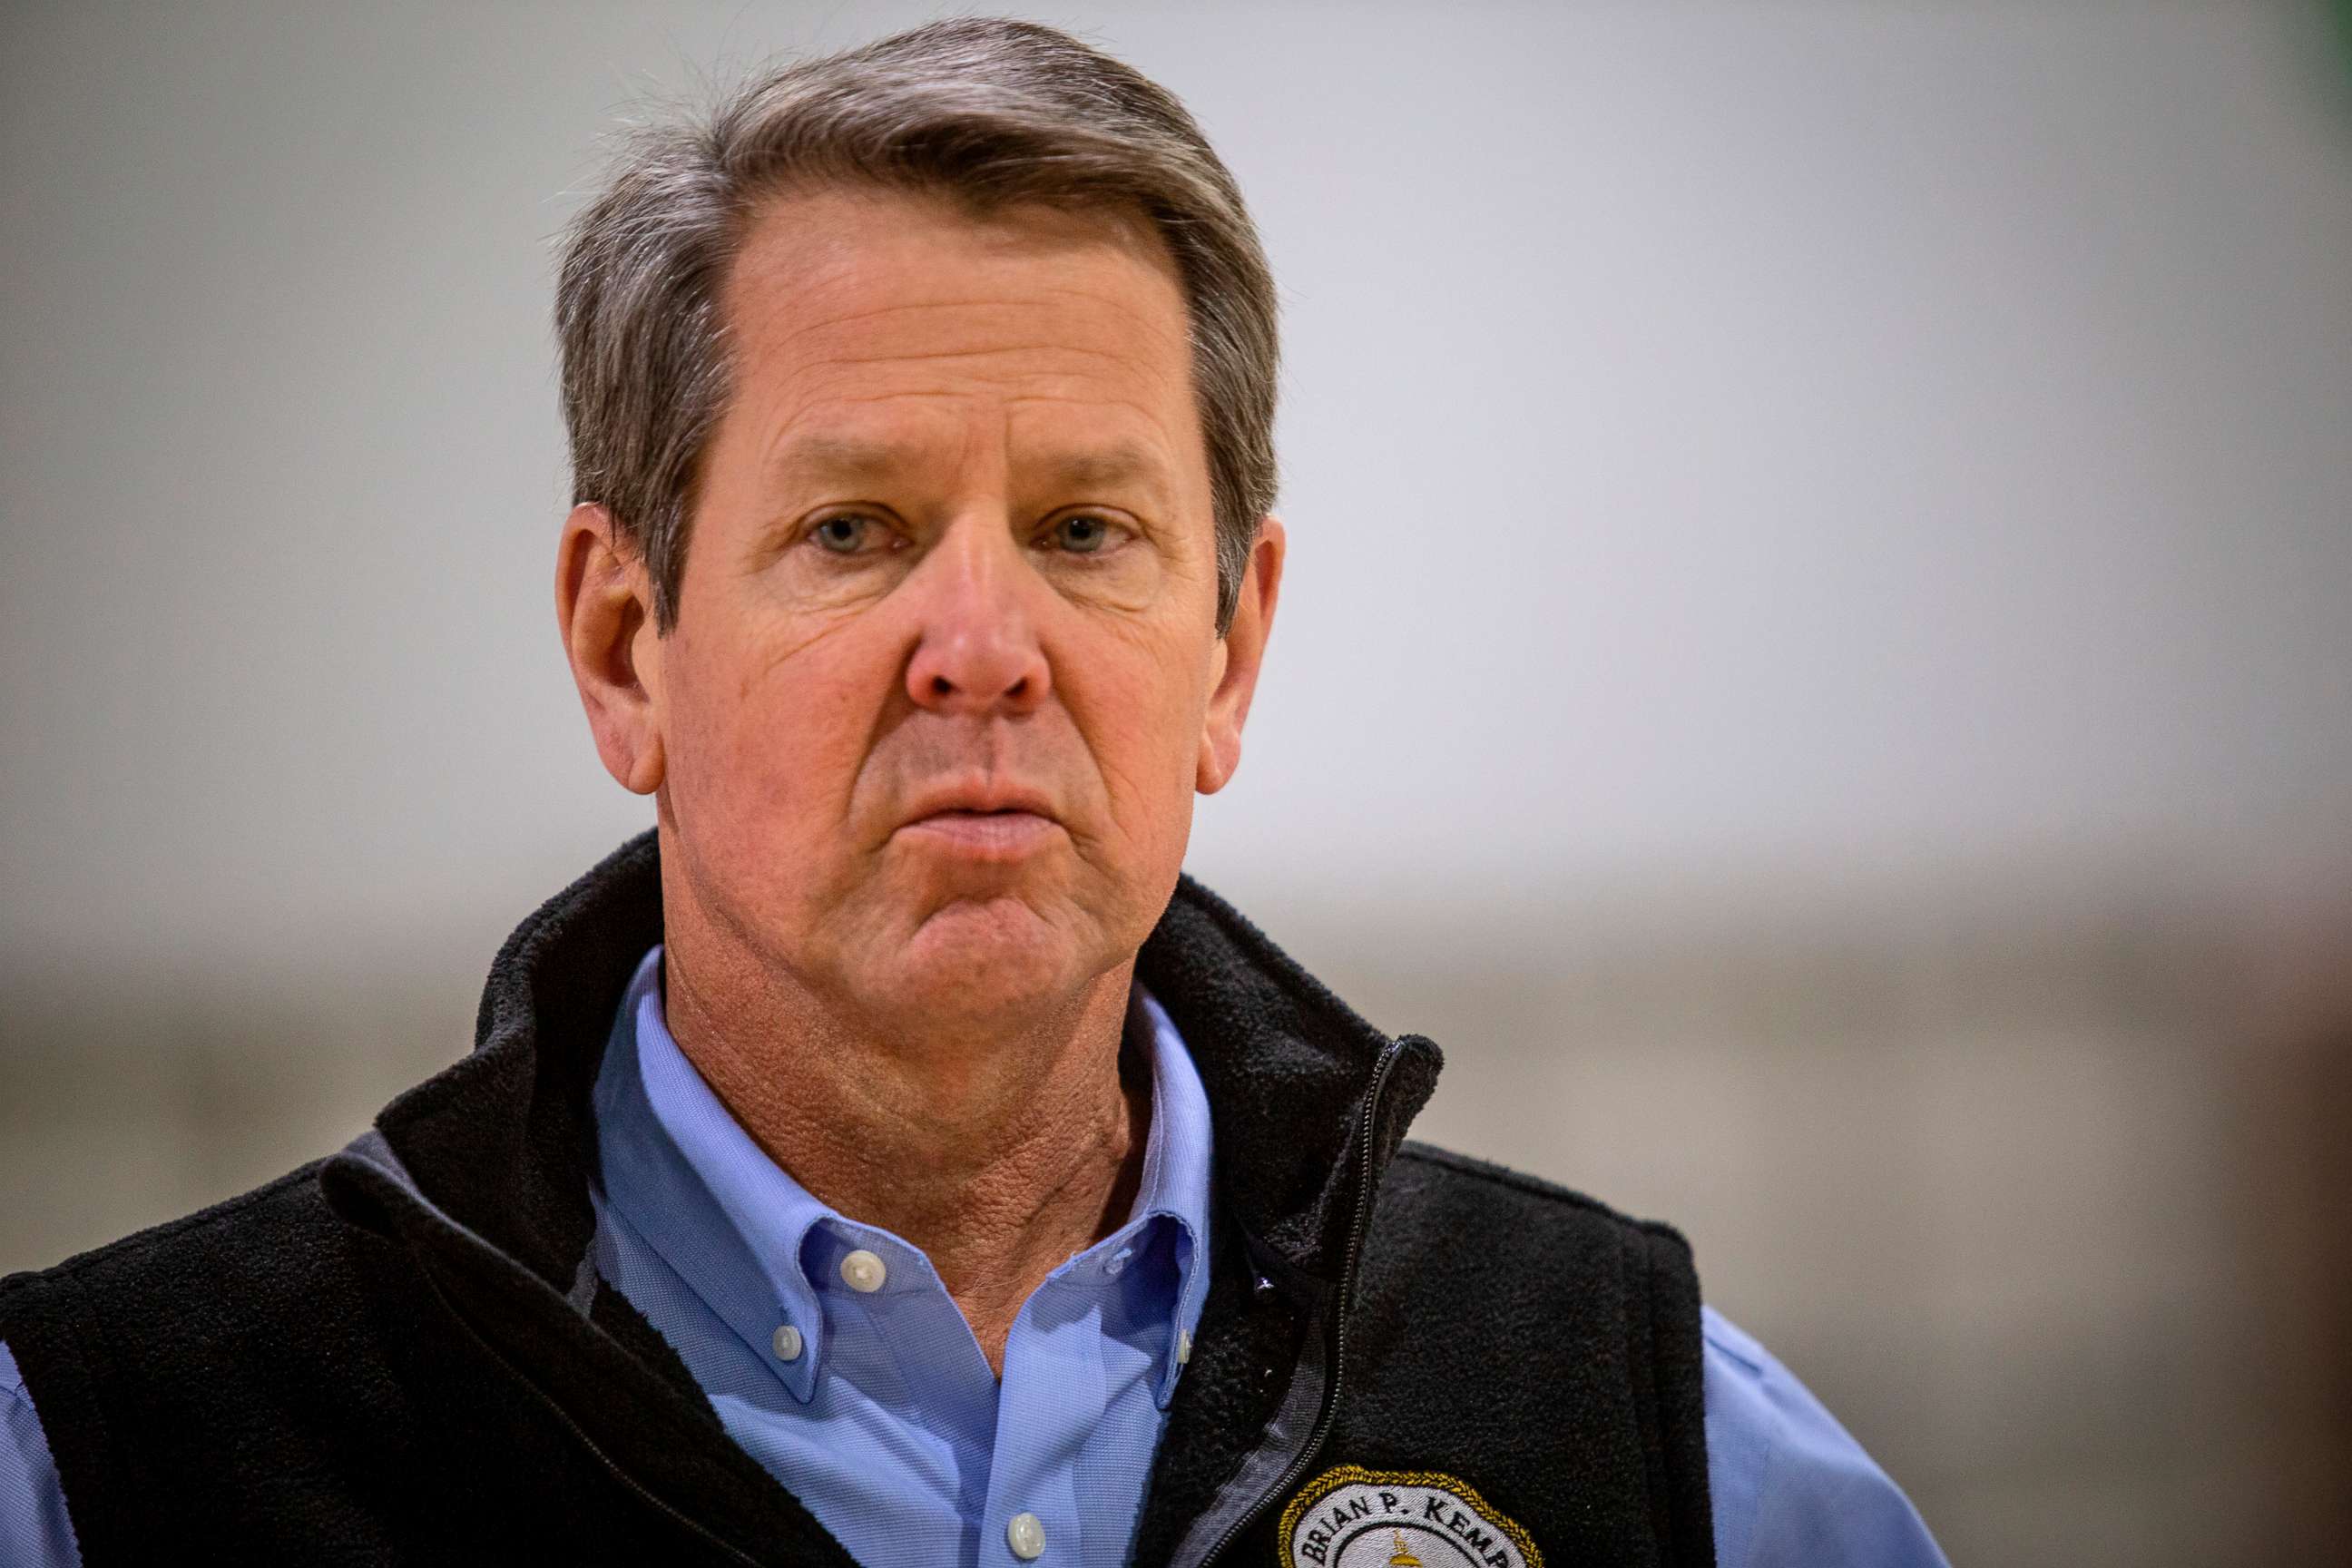 PHOTO: Georgia Gov. Brian Kemp listens to a question from the press during a tour of a temporary hospital at the Georgia World Congress Center in Atlanta, April 16, 2020.